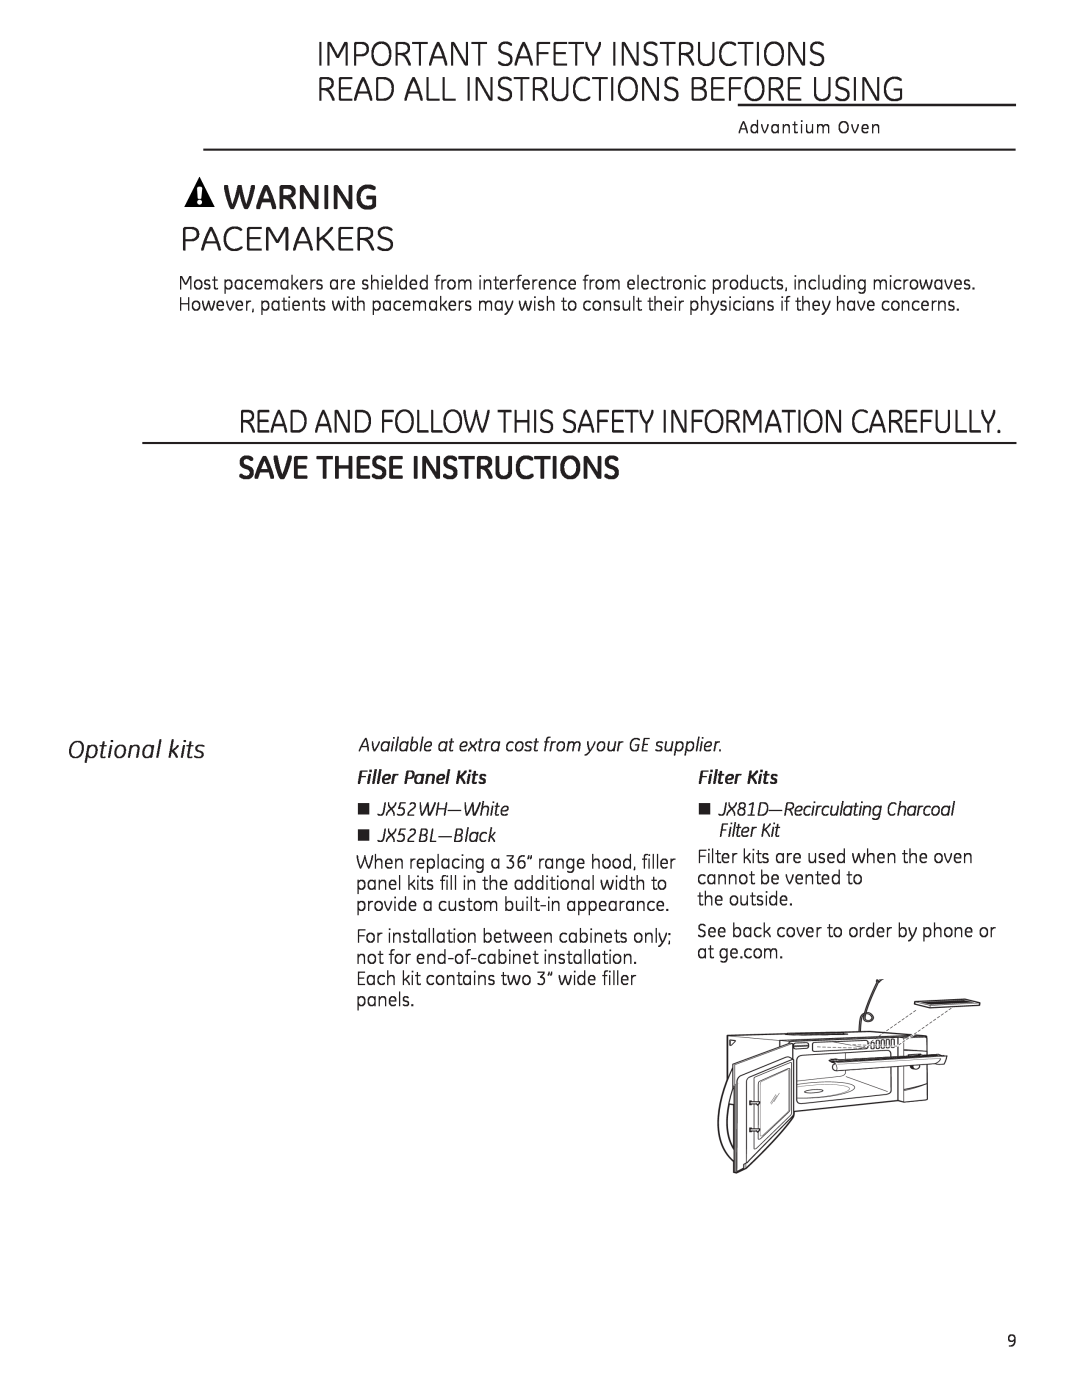 GE PSA1200, PSA1201 Pacemakers, Save These Instructions, Read And Follow This Safety Information Carefully, Optional kits 